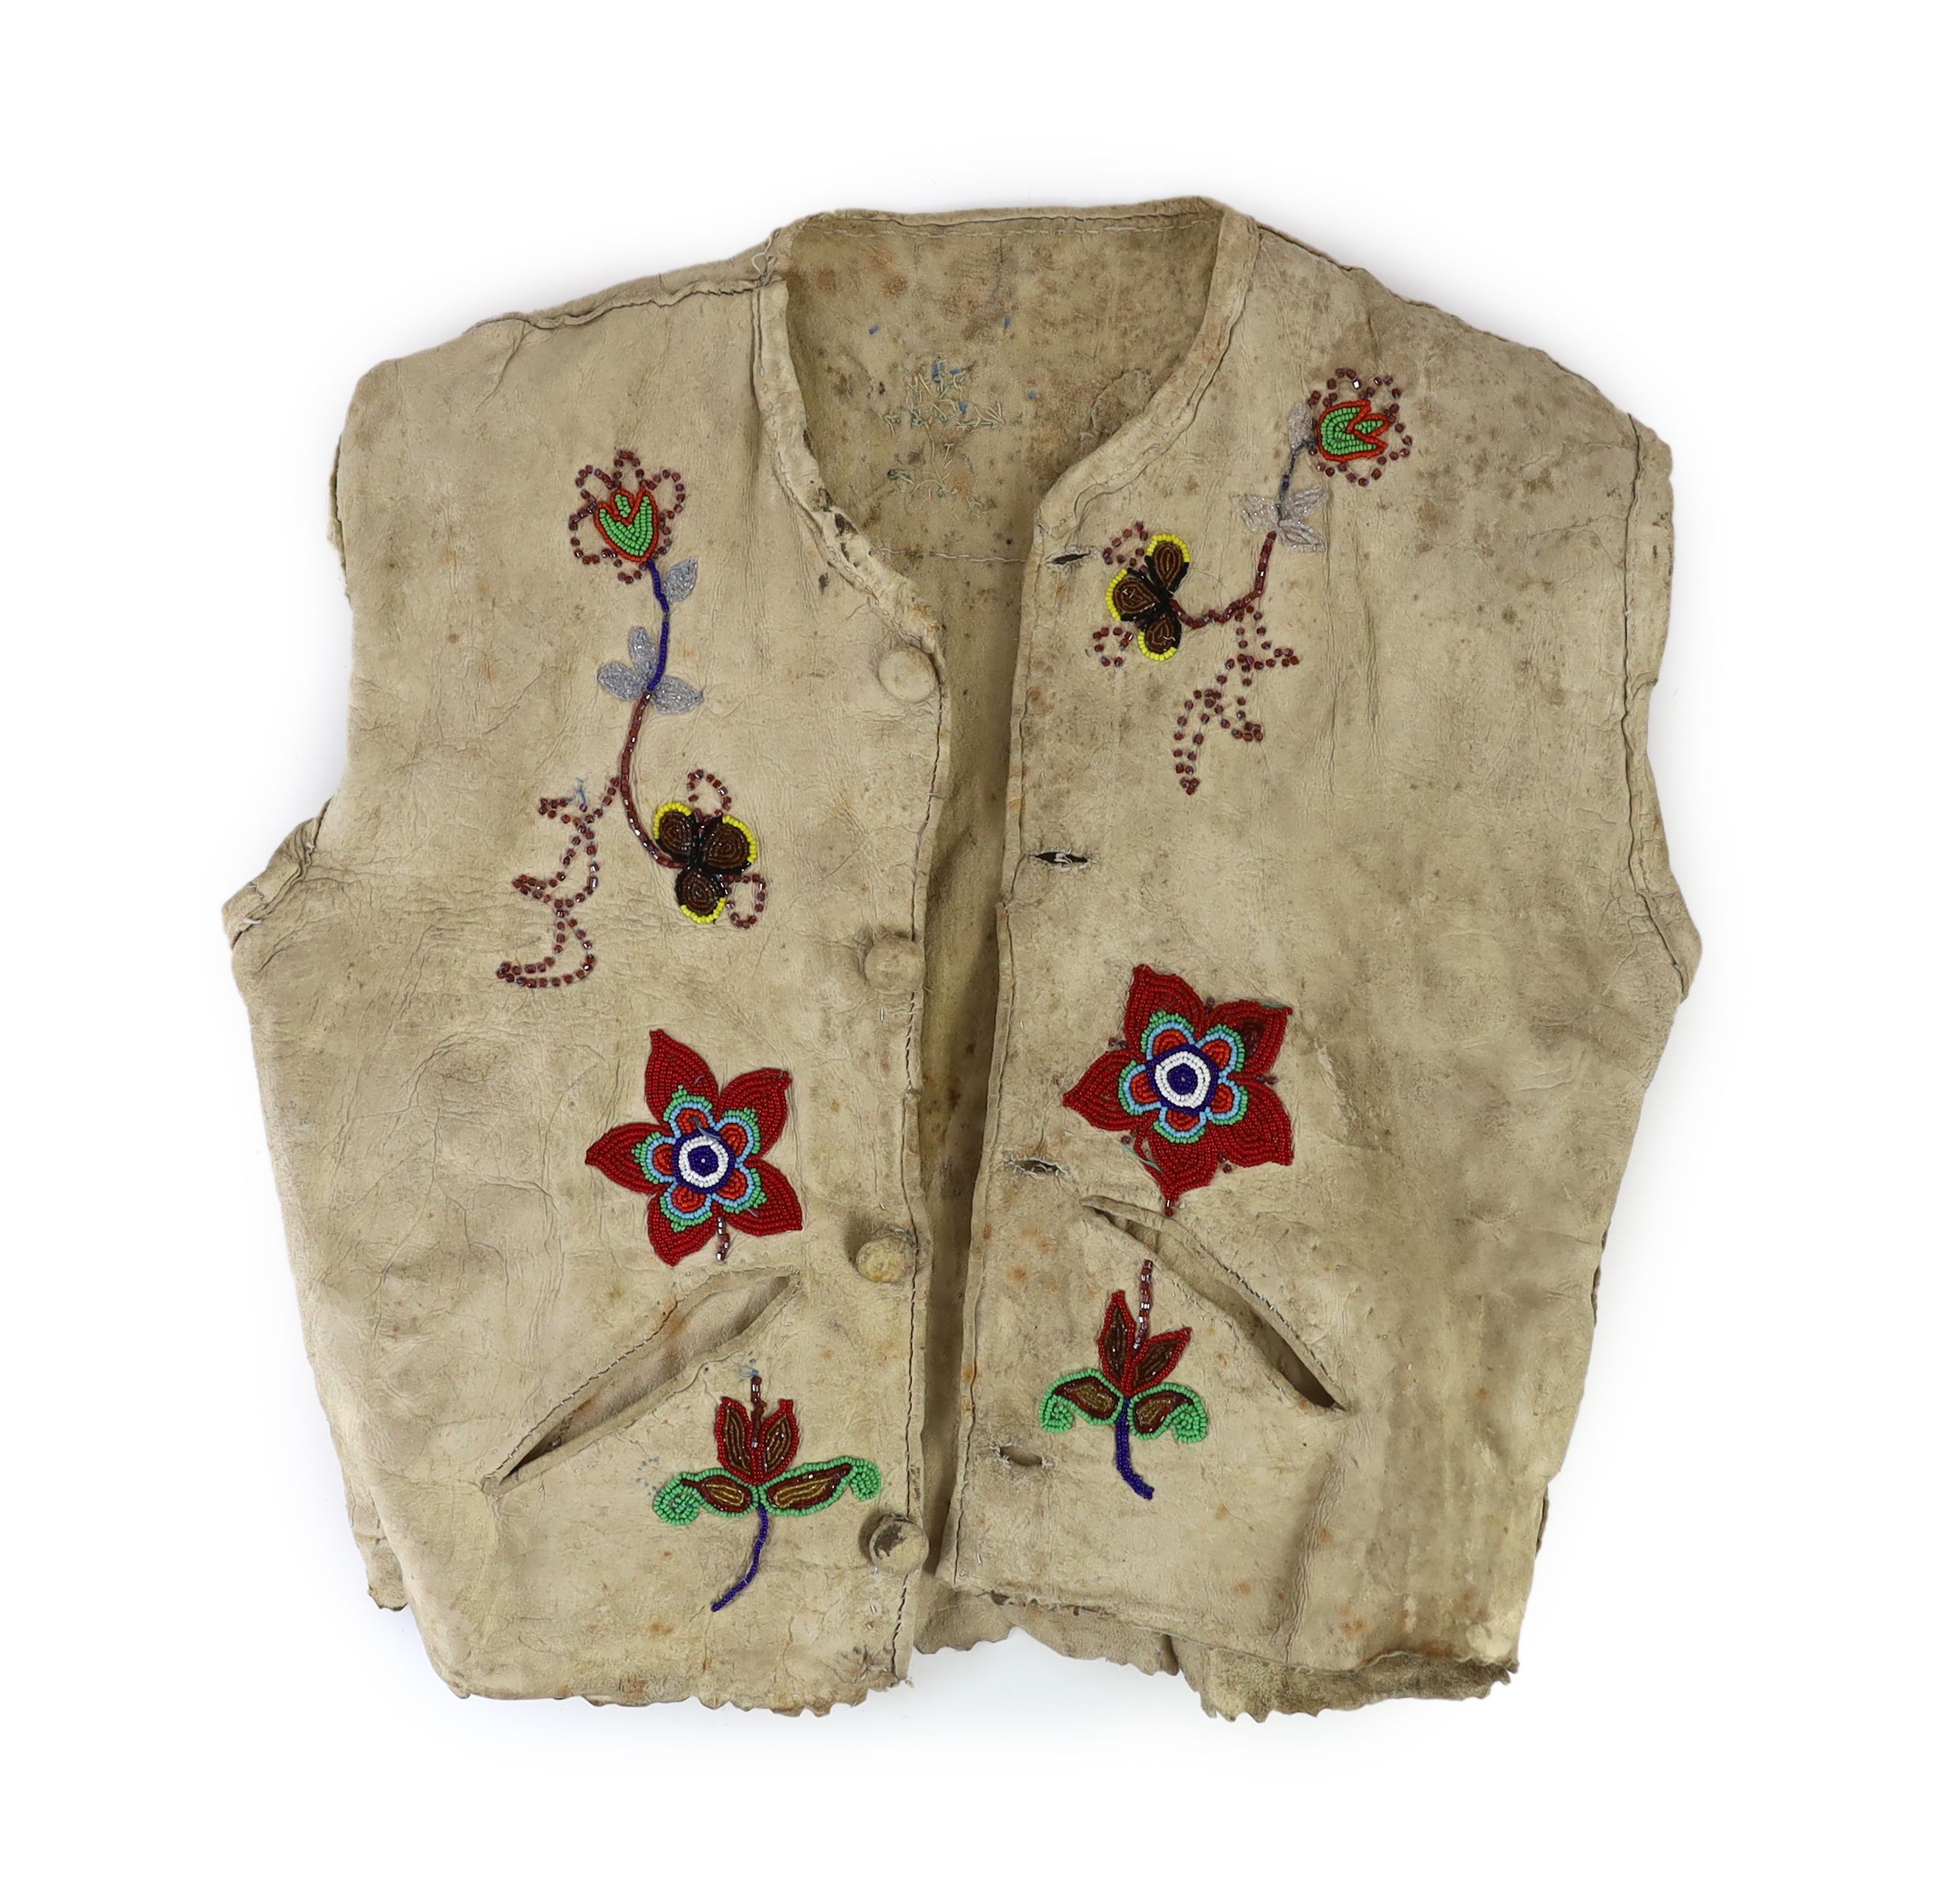 A Native American Plains Indian glass beadwork hide waistcoat, probably Iroquois